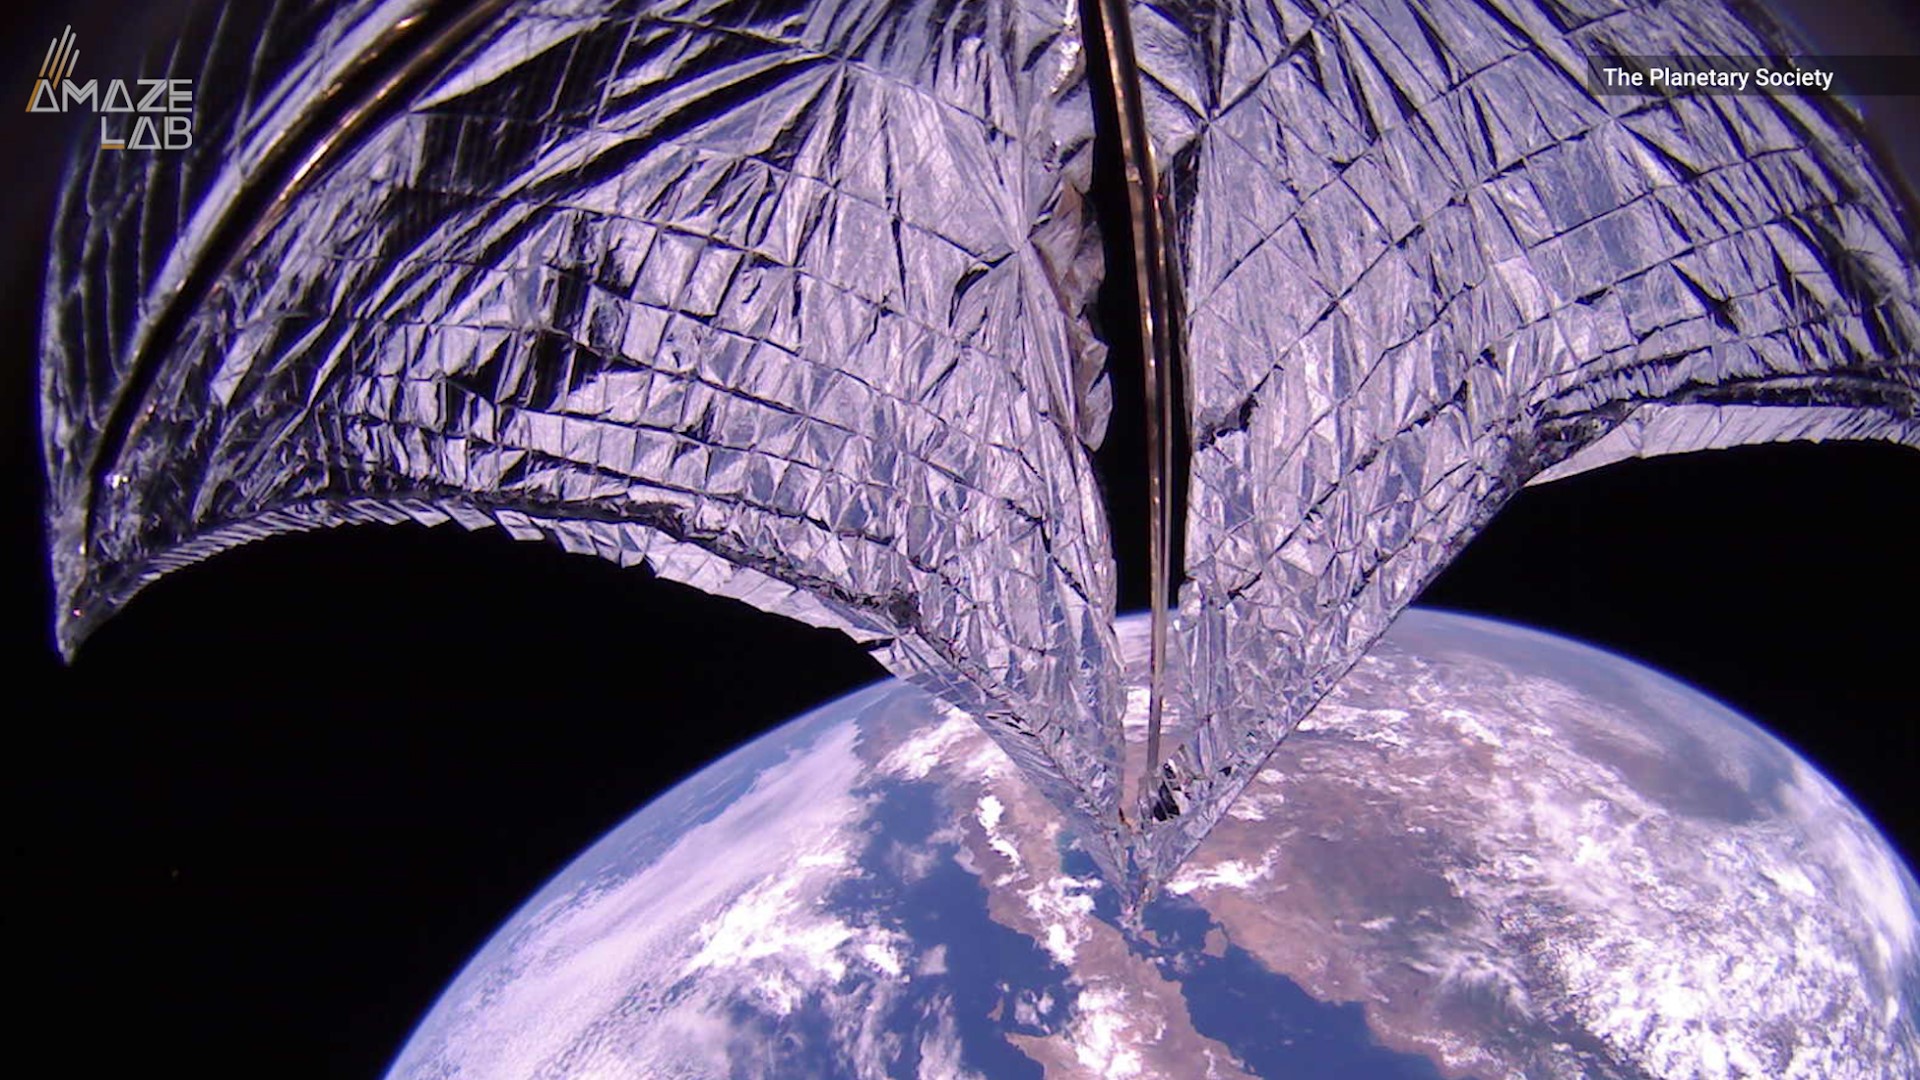 Watch as LightSail 2 deploys its boxing ring-sized sail and feast your eyes on beautiful photos of Earth it has snapped while in orbit. The Planetary Society's LightSail 2 is the first spacecraft to be solely propelled by sunlight.